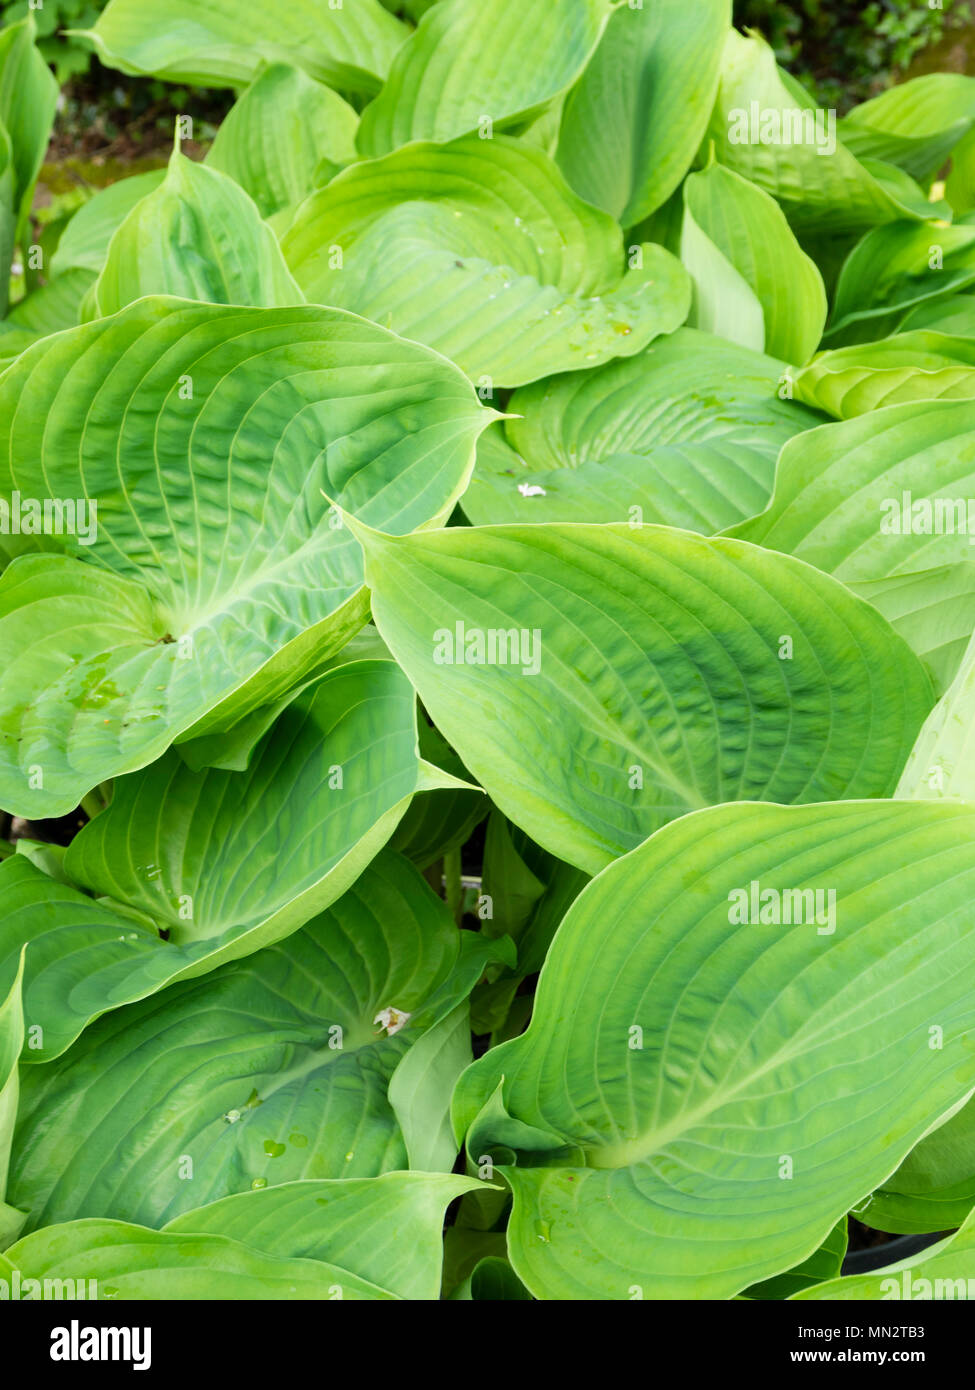 Massive leaves of the ornamental plantain lily, Hosta 'Sum and Substance' Stock Photo